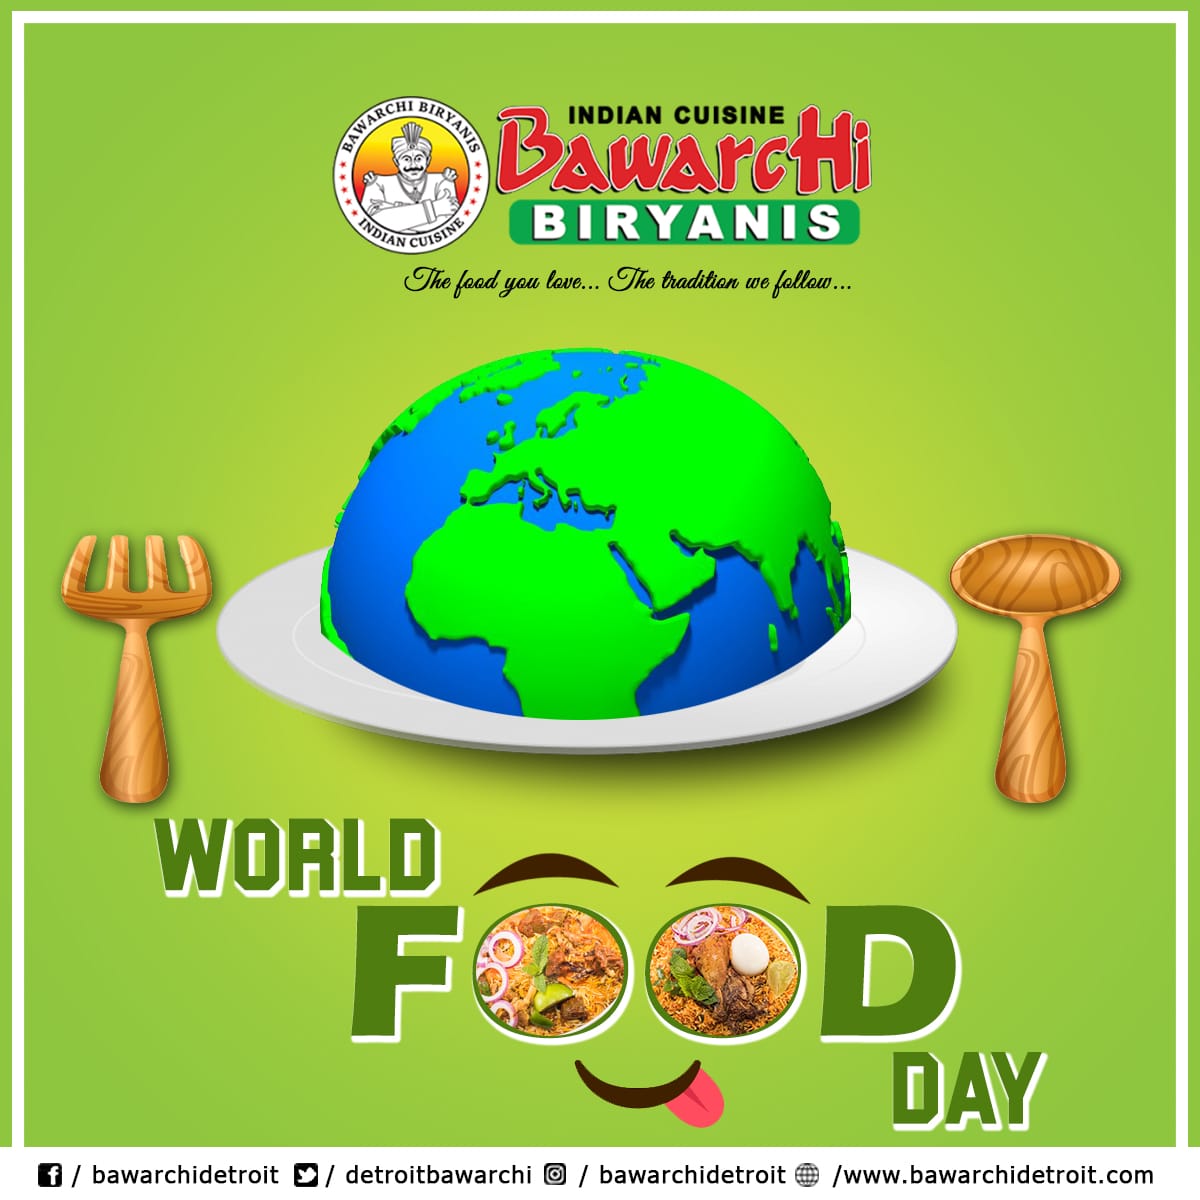 Happy World Food Day From Bawarchi Biryanis - Detroit
Meet Meat... Ready To Eat... at Our Restaurant
#bawarhci #biryanis #detroit #bawarchidetroit #happy #world #food #day #foodday #biryani #bawarchibiryani #bawarchifood #foodblog